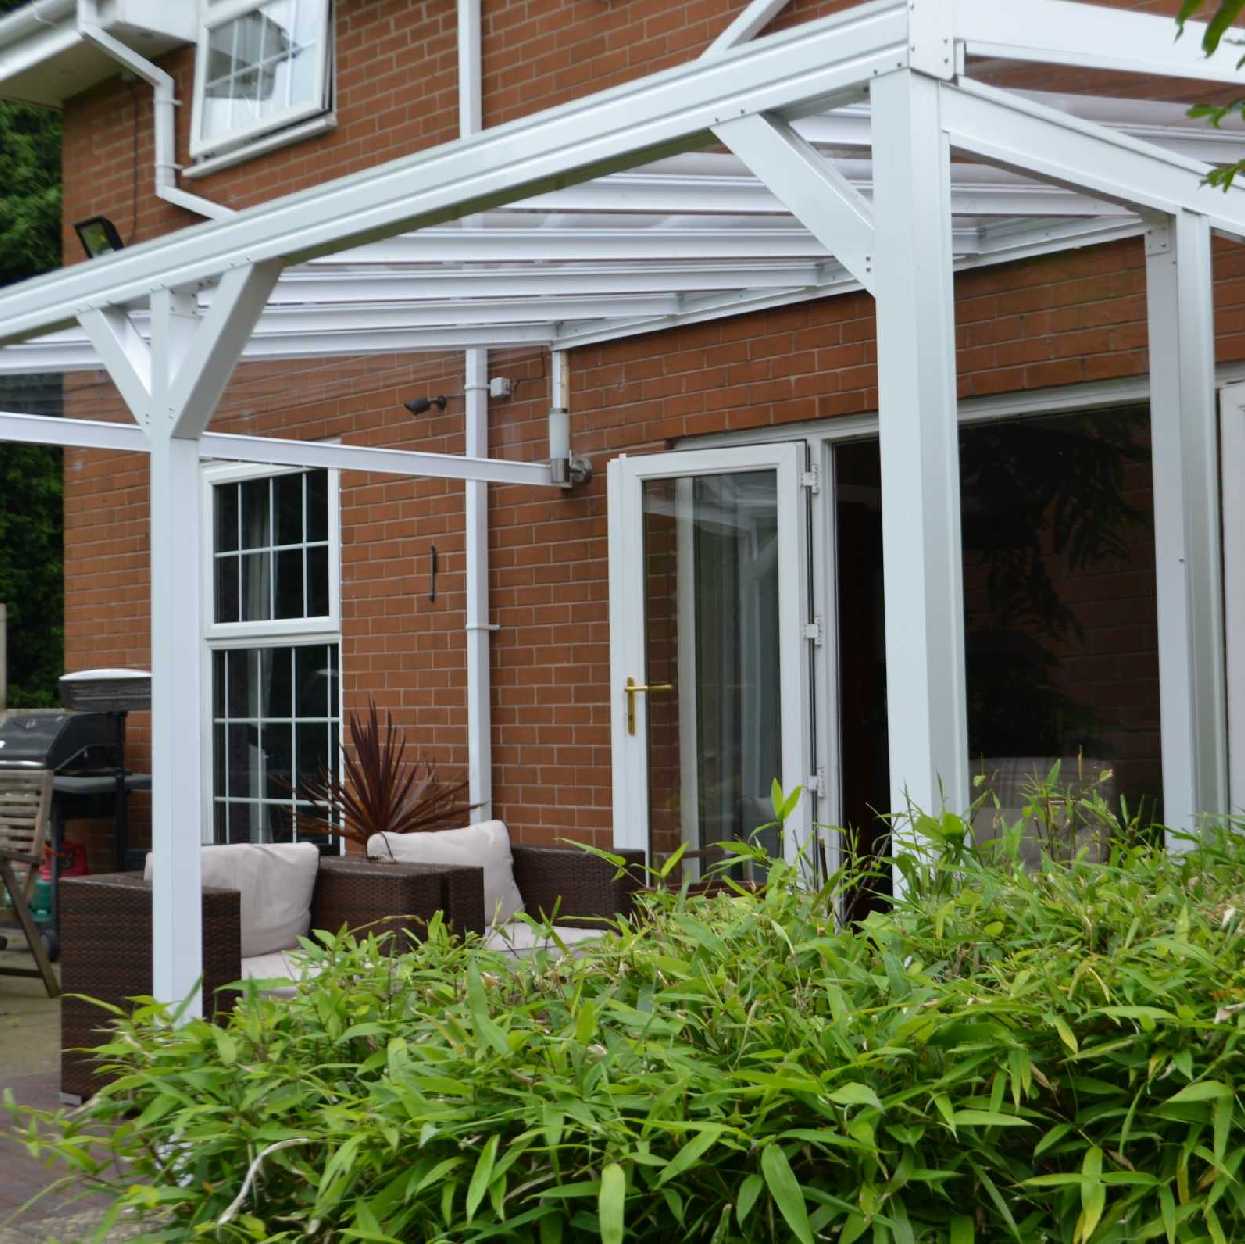 Omega Smart Lean-To Canopy, White with 6mm Glass Clear Plate Polycarbonate Glazing - 8.4m (W) x 3.0m (P), (4) Supporting Posts from Omega Build